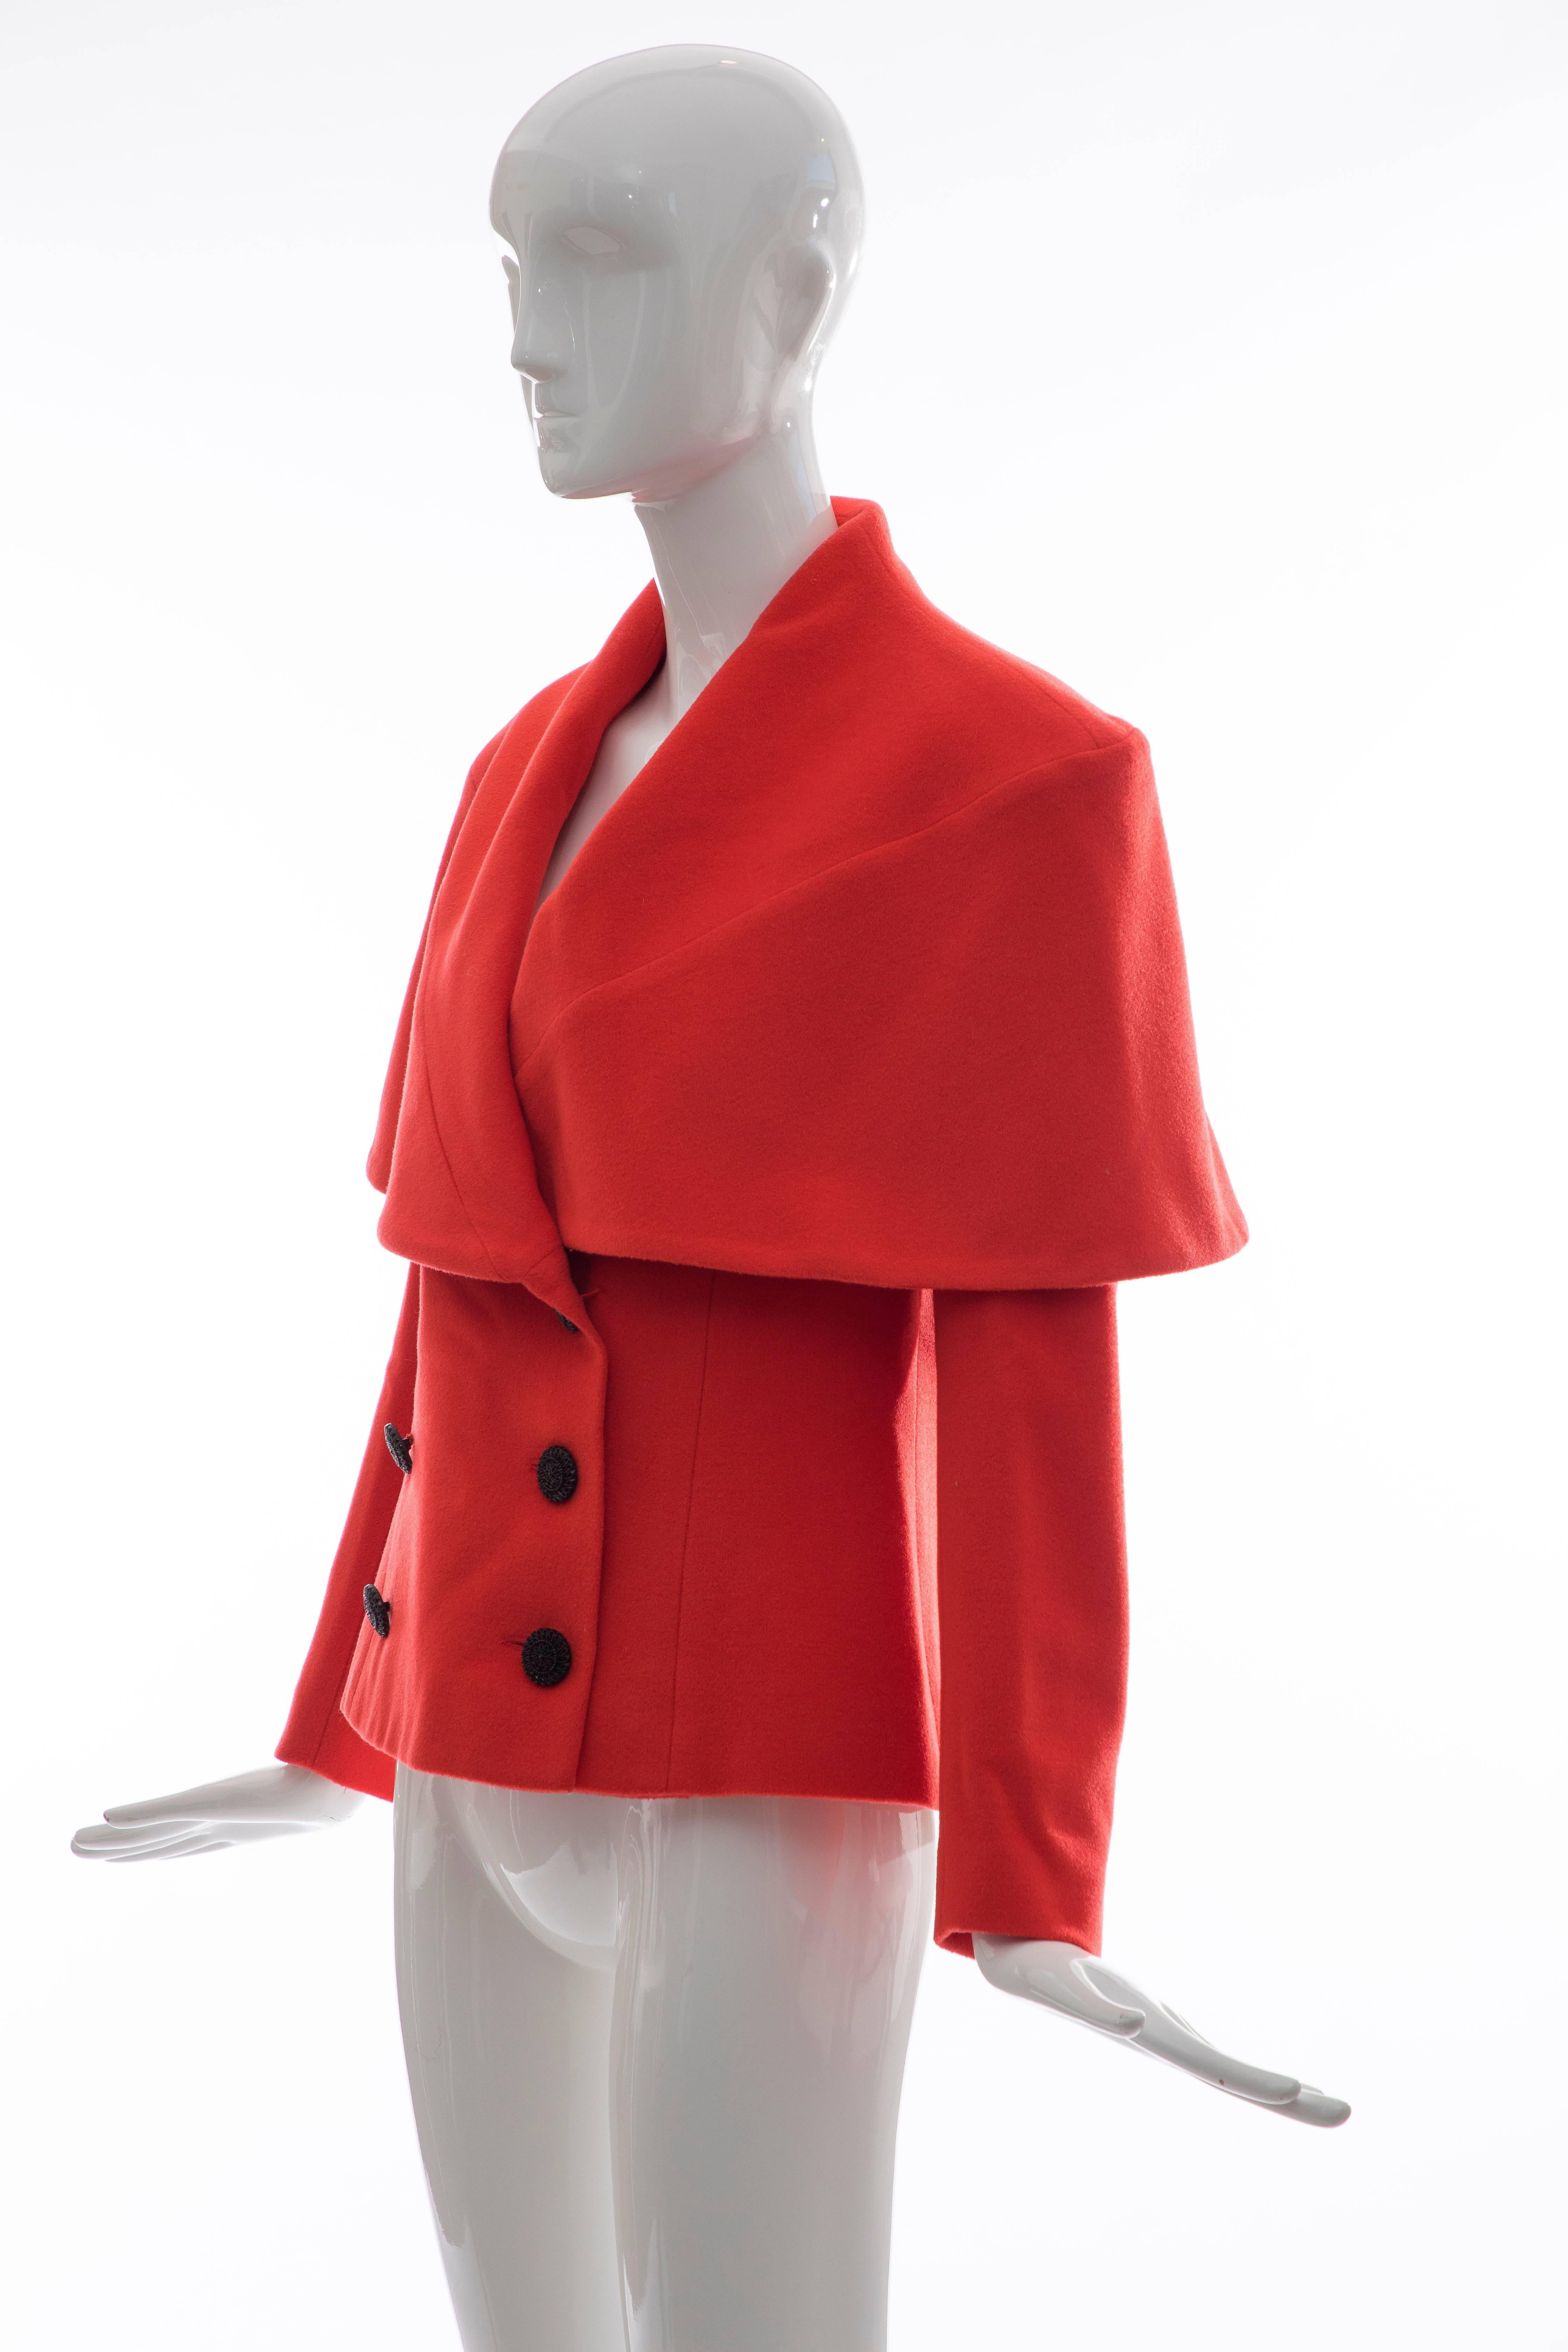 Karl Lagerfeld For Chloe Paprika Wool Shawl Collar Jacket, Circa 1980's For Sale 2